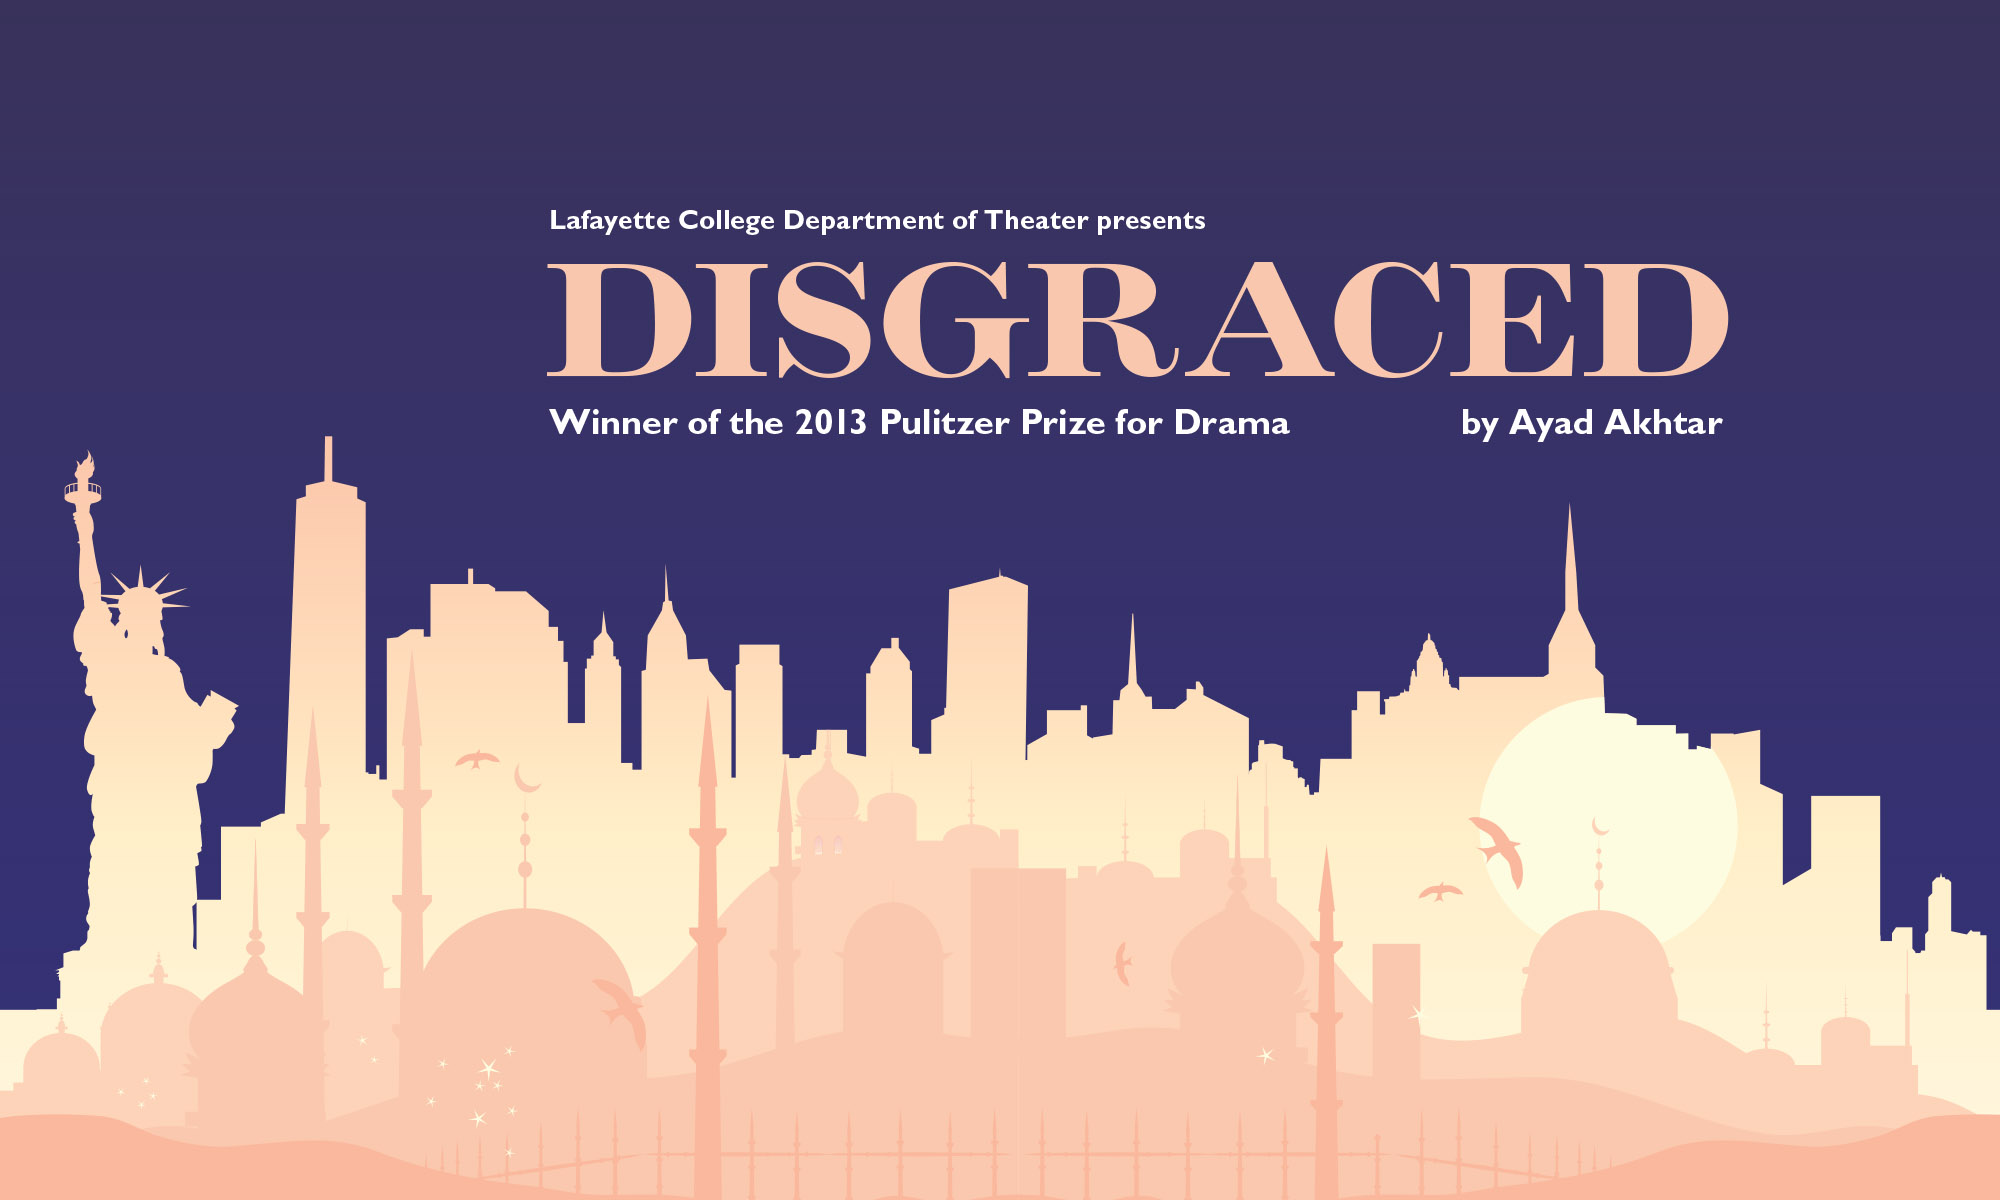 Lafayette College Department of Theater Presents Disgraced